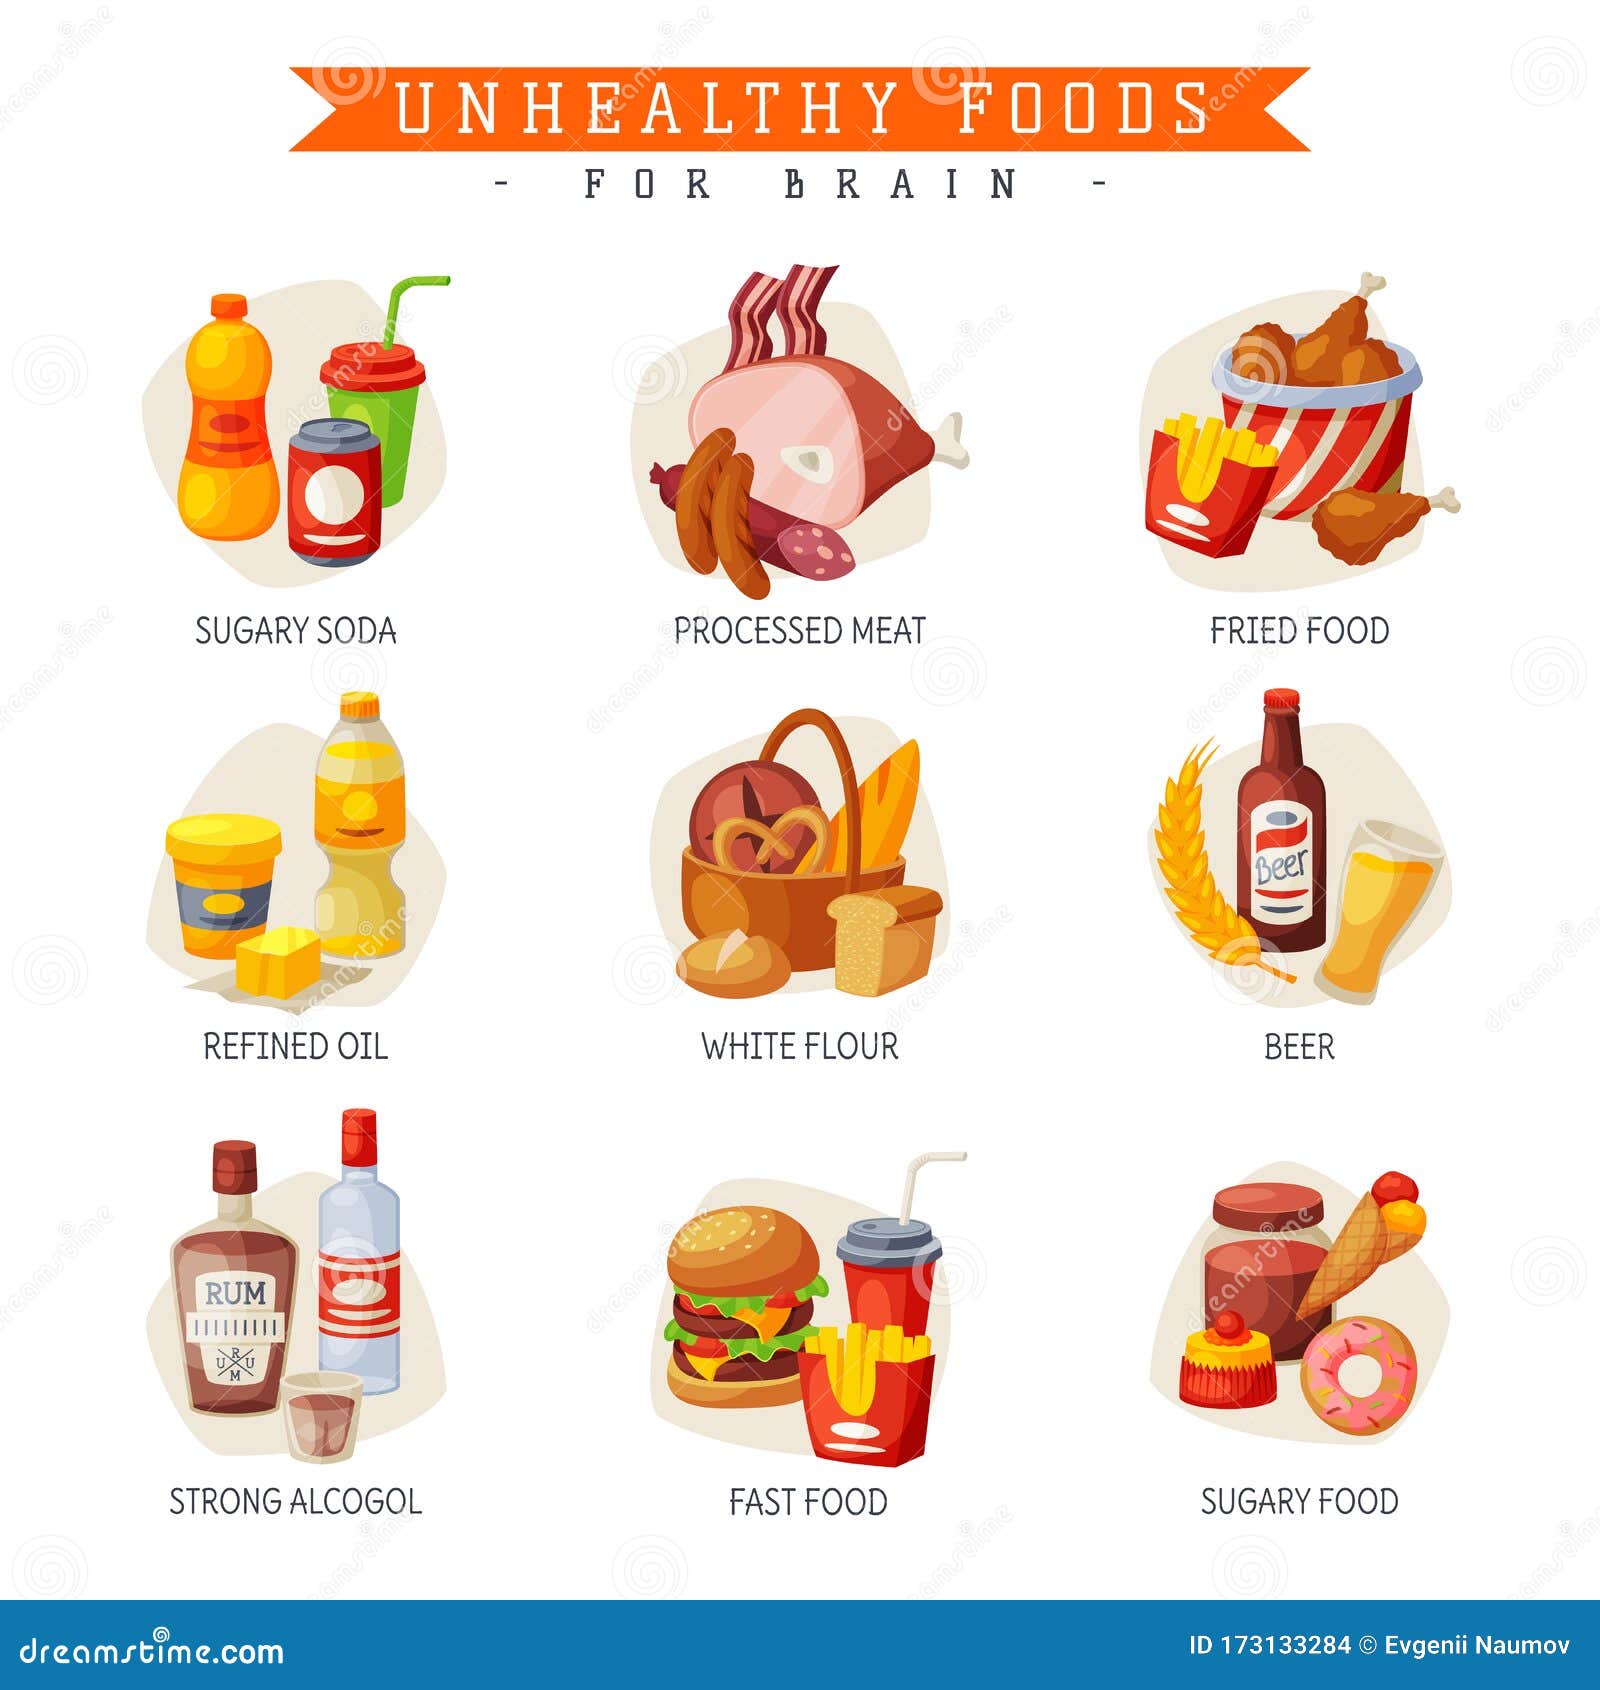 unhealthy foods for brain, sugary soda and food, processed meat, fried food, refined oil, white flour, beer, strong